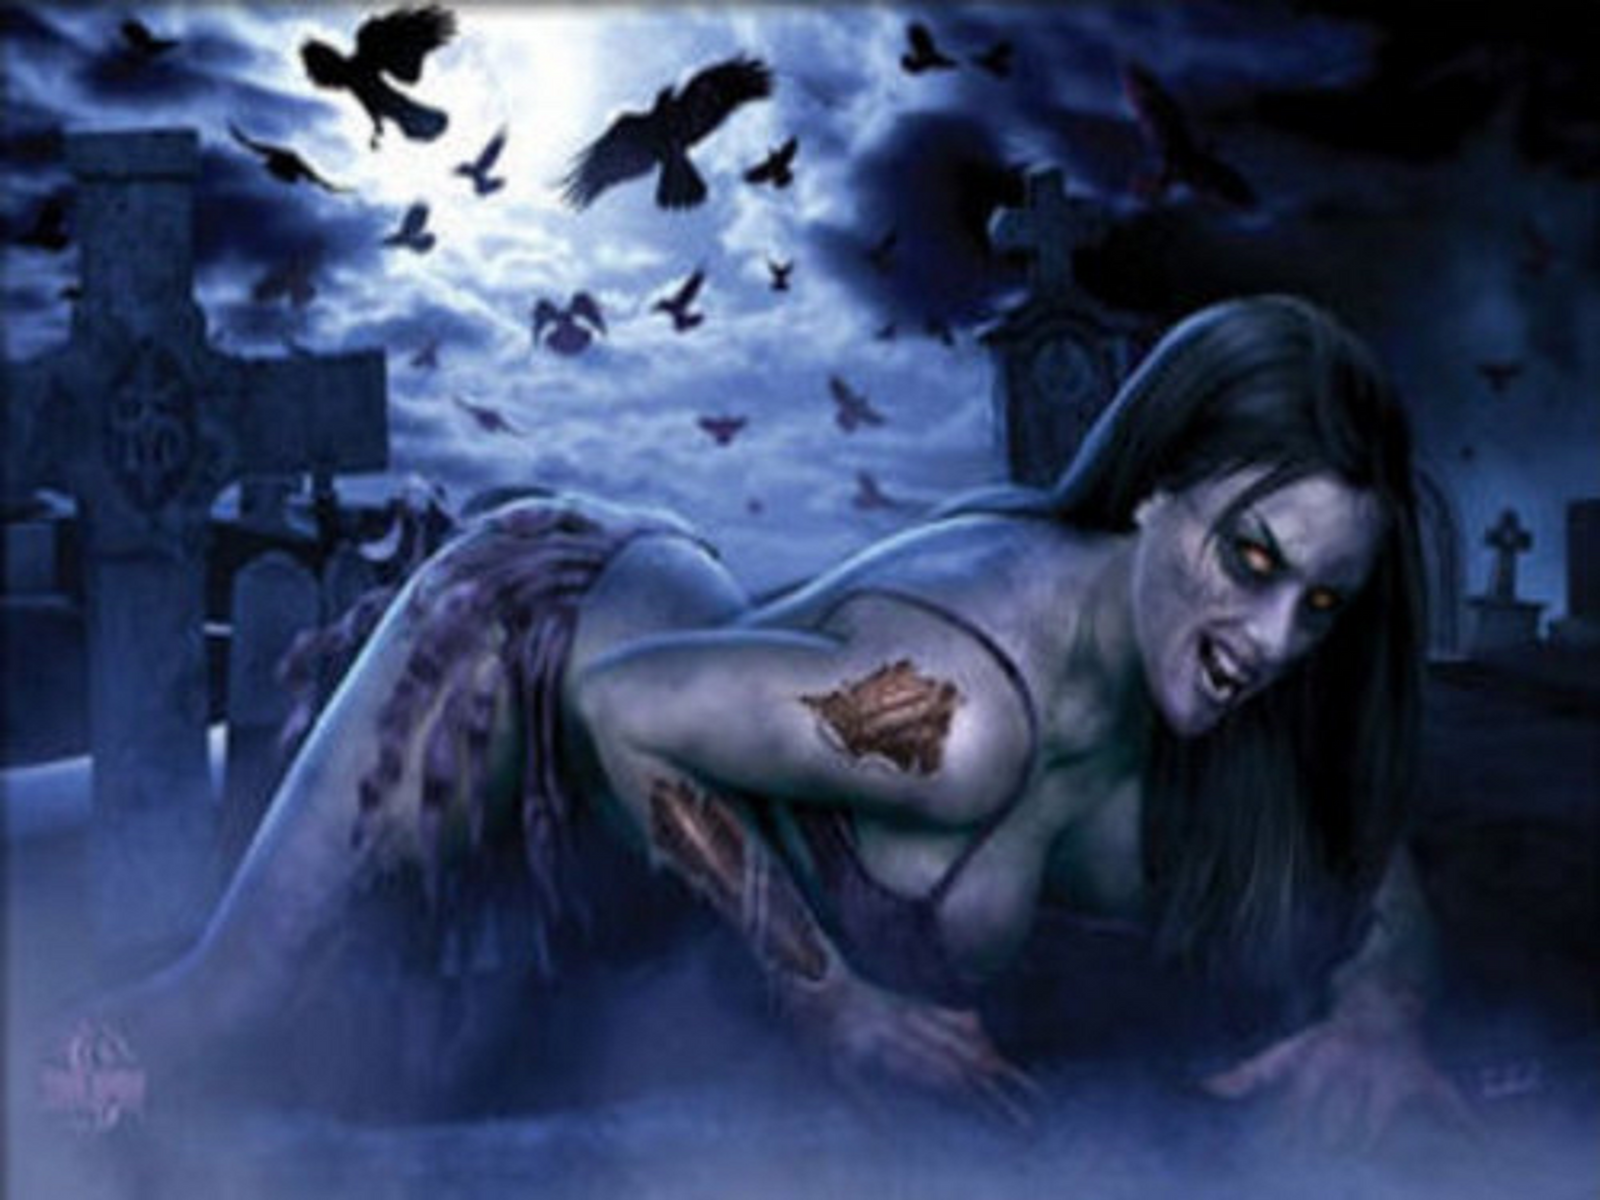 http://img06.deviantart.net/ae53/i/2014/067/8/9/sexy_graveyard_zombie_by_myjavier007-d79gcwe.png